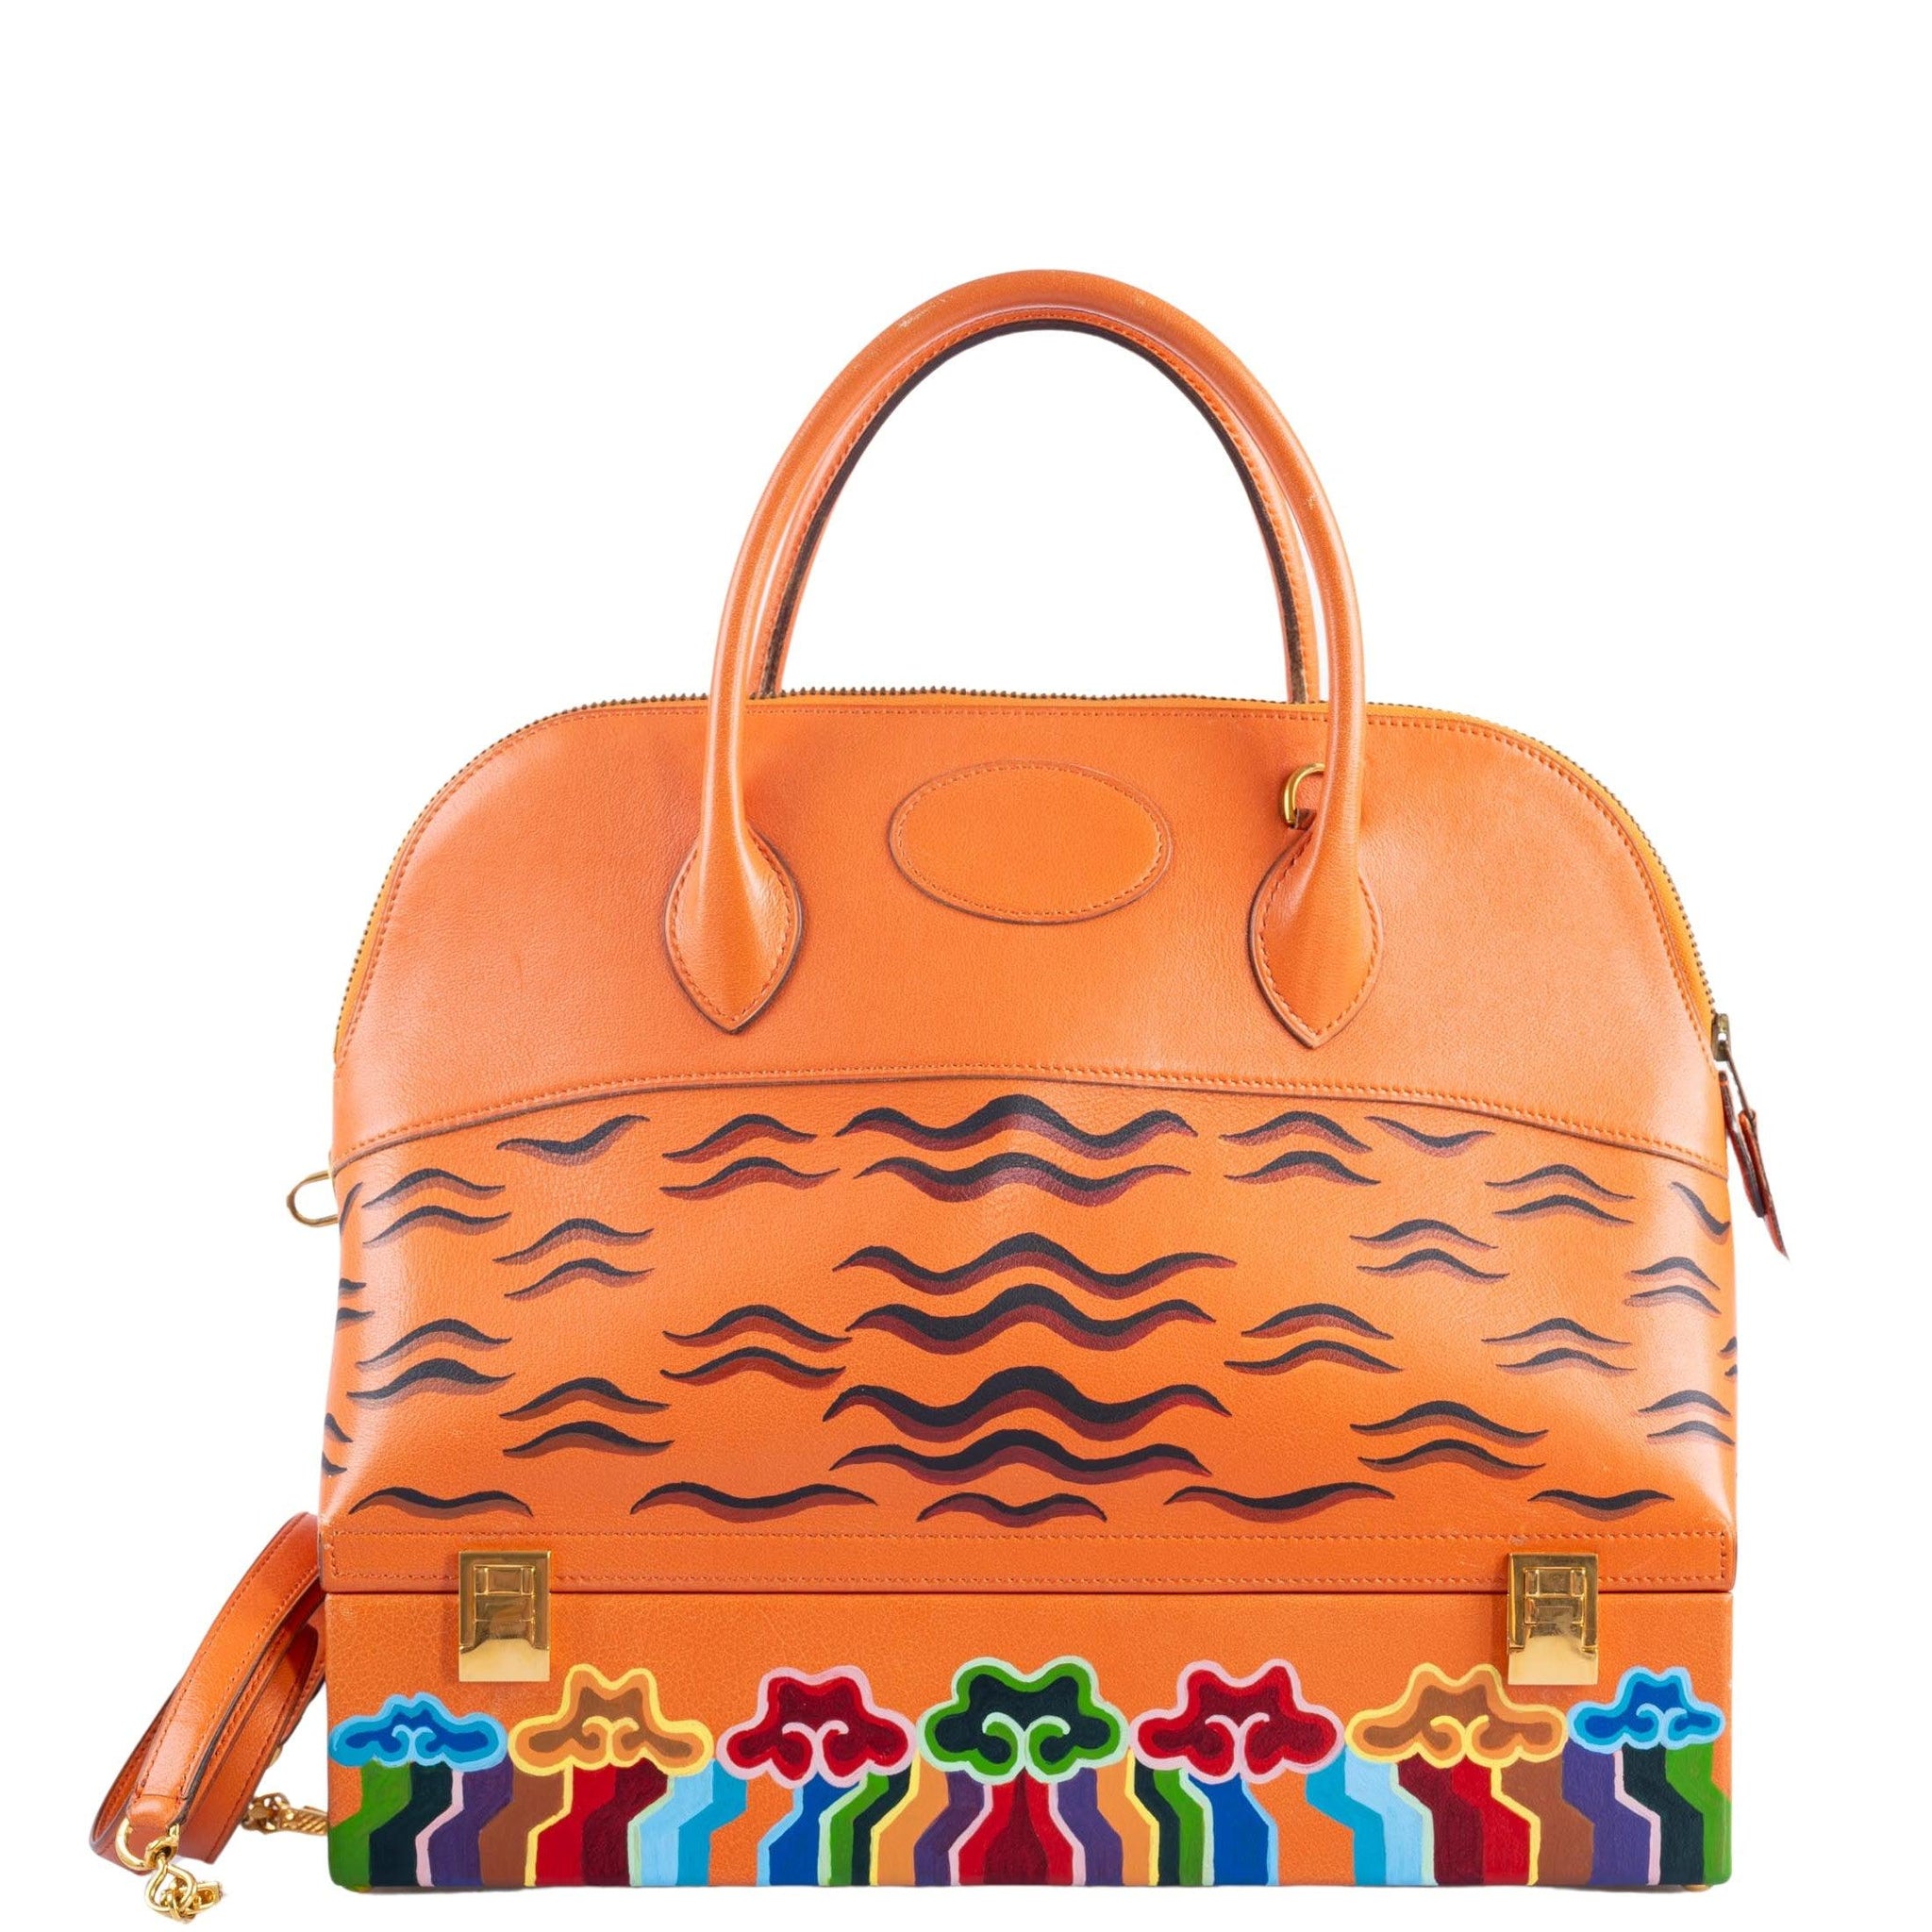 Connect Paris - The Vintage Iconic Hermes Bag by Jay Ahr